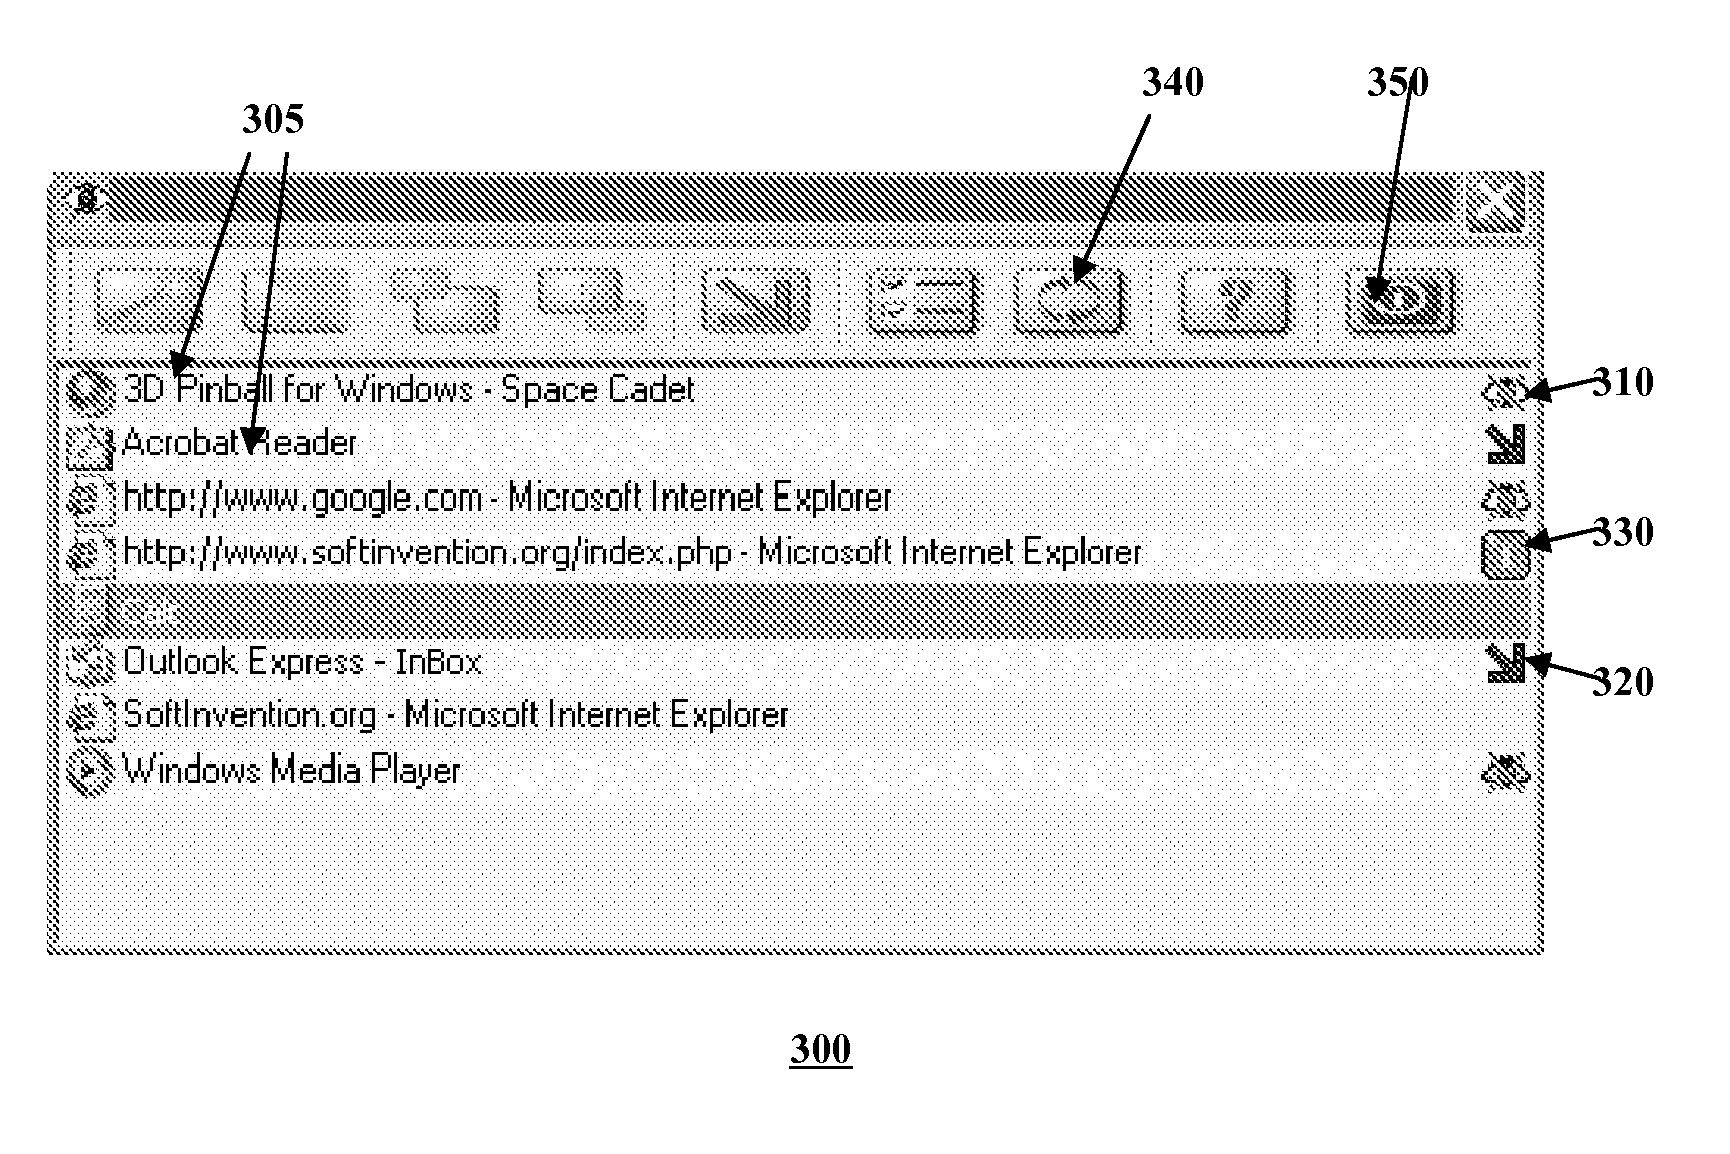 Method and System for Enabling Computer Systems to Be Responsive to Environmental Changes